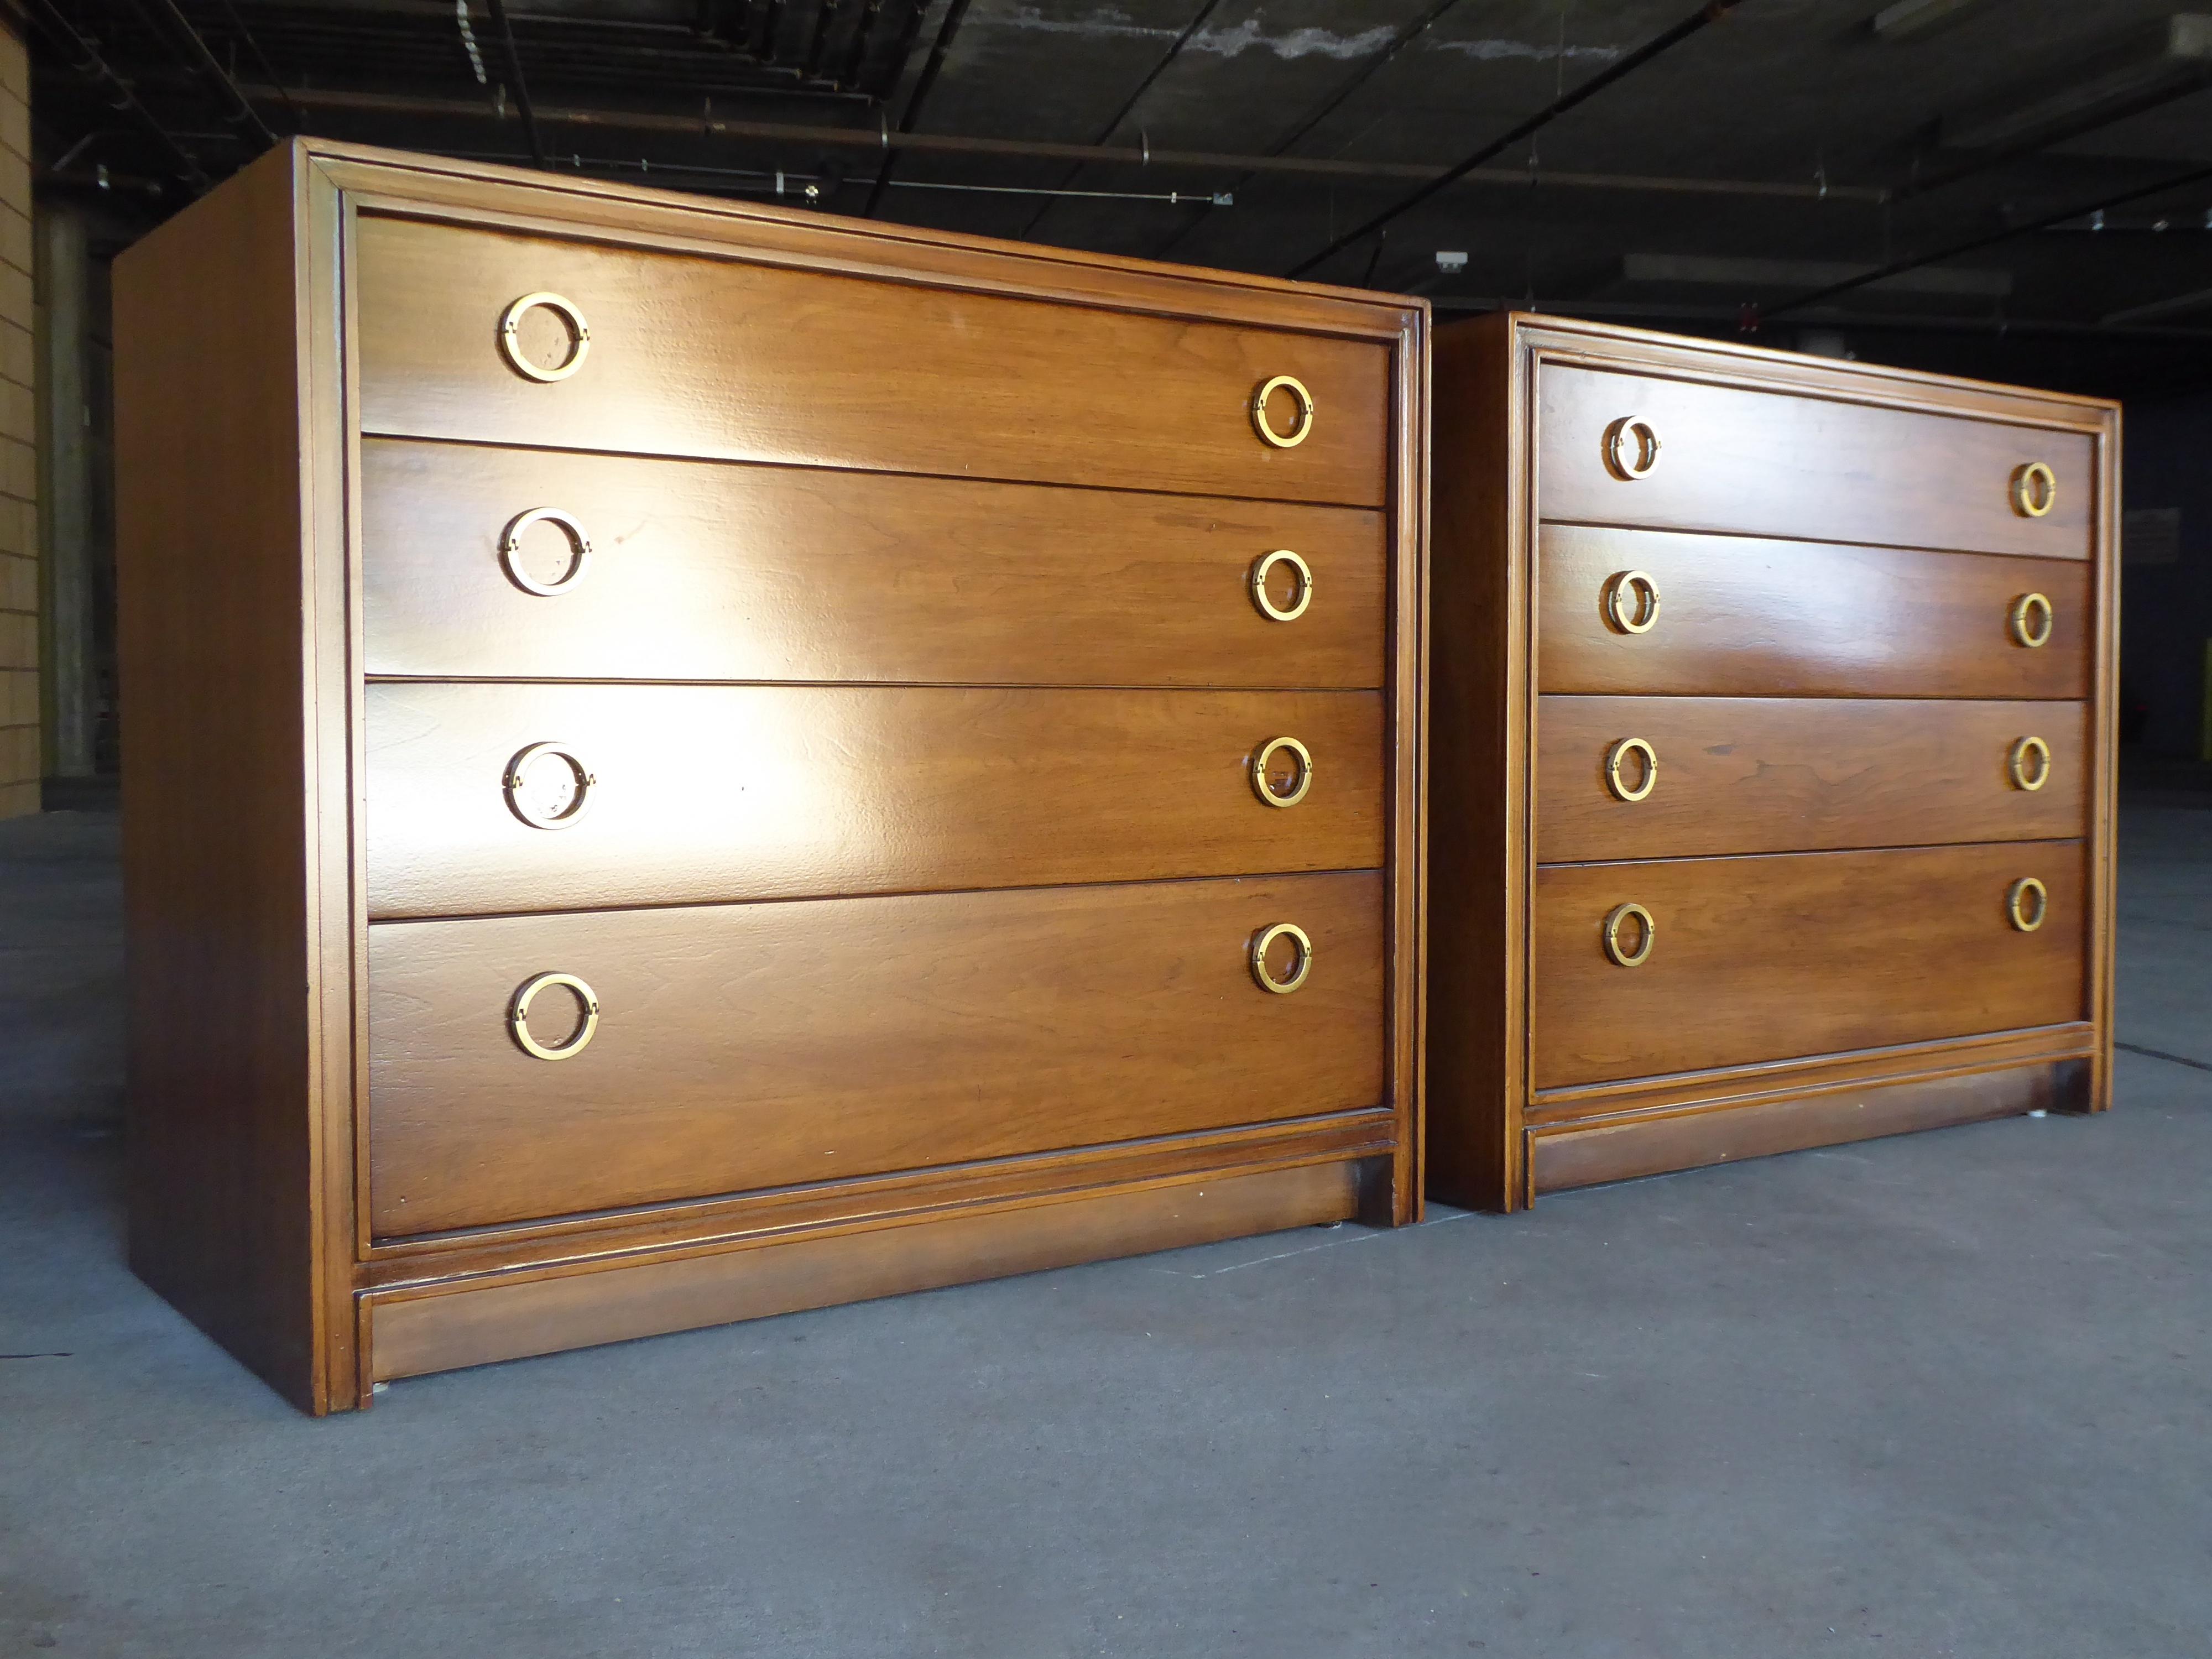 A pair of walnut four-drawer bedside chests made by Hickory Furniture Co., circa 1960s. The chests have been refinished and the brass hardware is original.